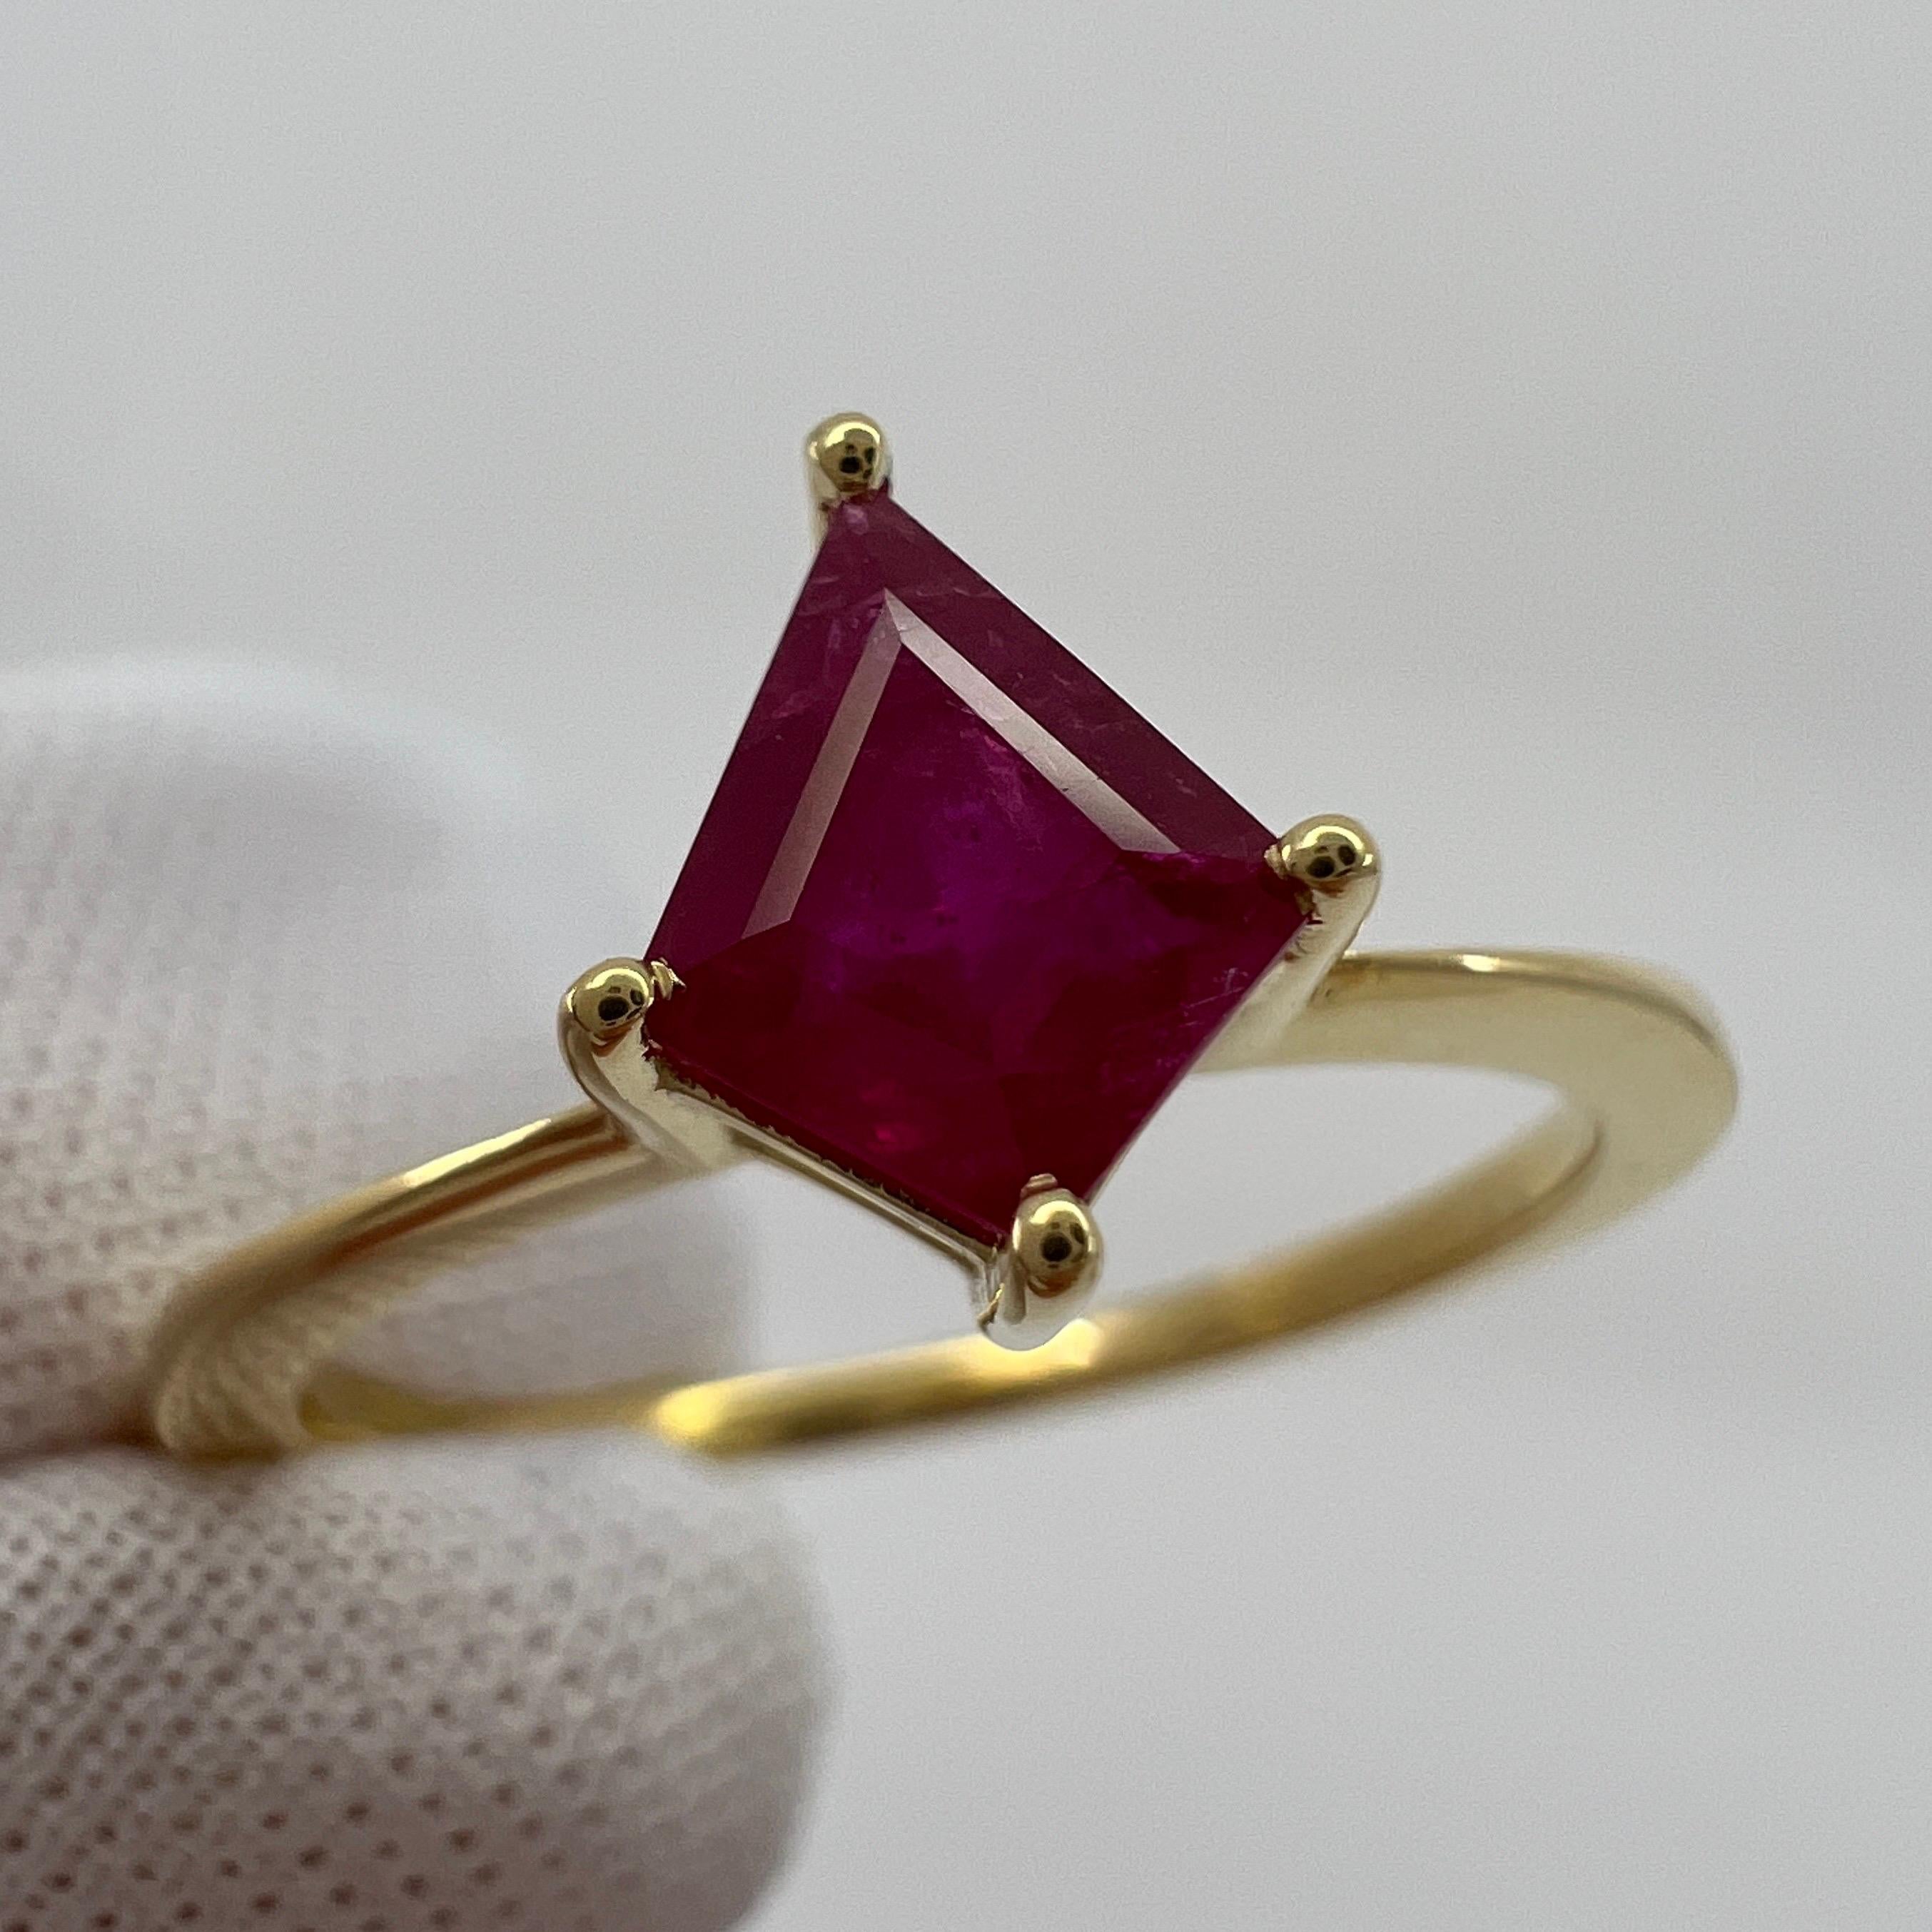 Pinkish Red Ruby Fancy Kite Cut 18k Yellow Gold Modern Solitaire Ring.

0.73 Carat ruby with a unique fancy kite cut and stunning pinkish red colour. Measures 7.7x6.2mm

Set in a beautiful and delicate modern ring. 18k yellow gold.

Ring size UK N -